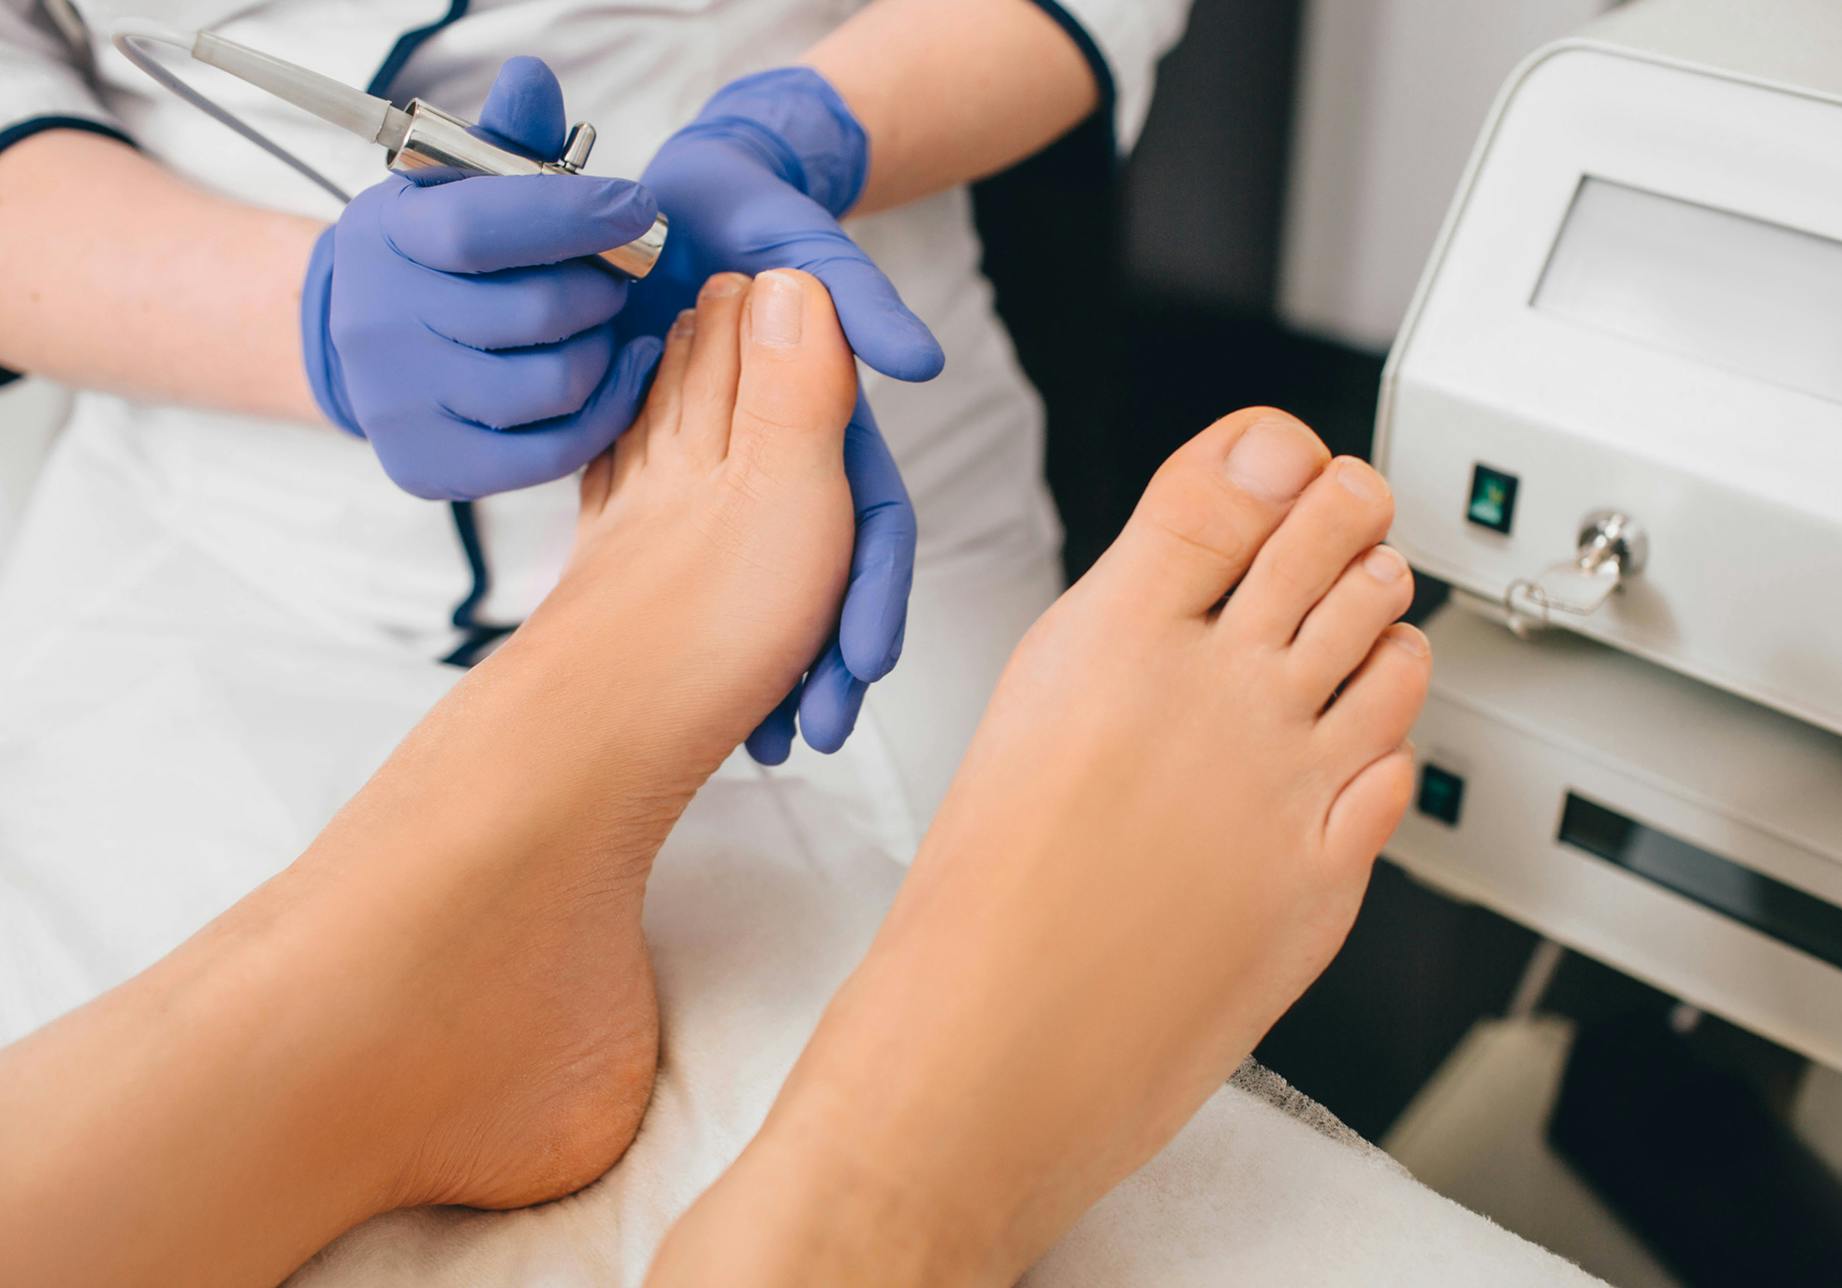 Patient having feet worked on by medical staff